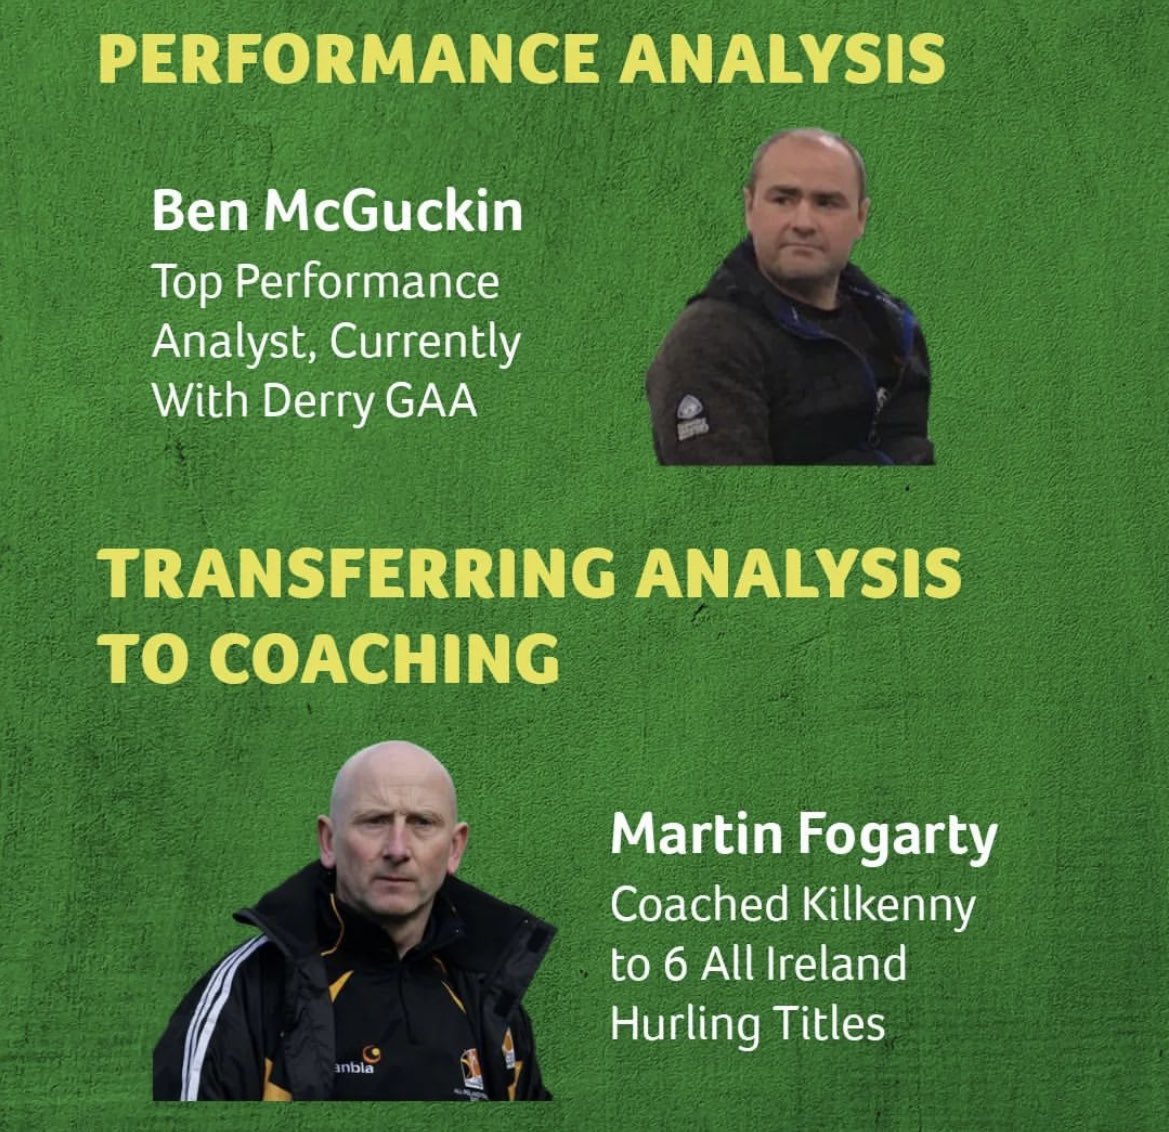 A High Performance GAA coaching seminar is being held in Naas GAA on 13th January. Tickets are just €35 and proceeds are going to Barretstown. The speakers cover both codes so a great day is guaranteed. Sign up at link below eventbrite.com/e/high-perform…